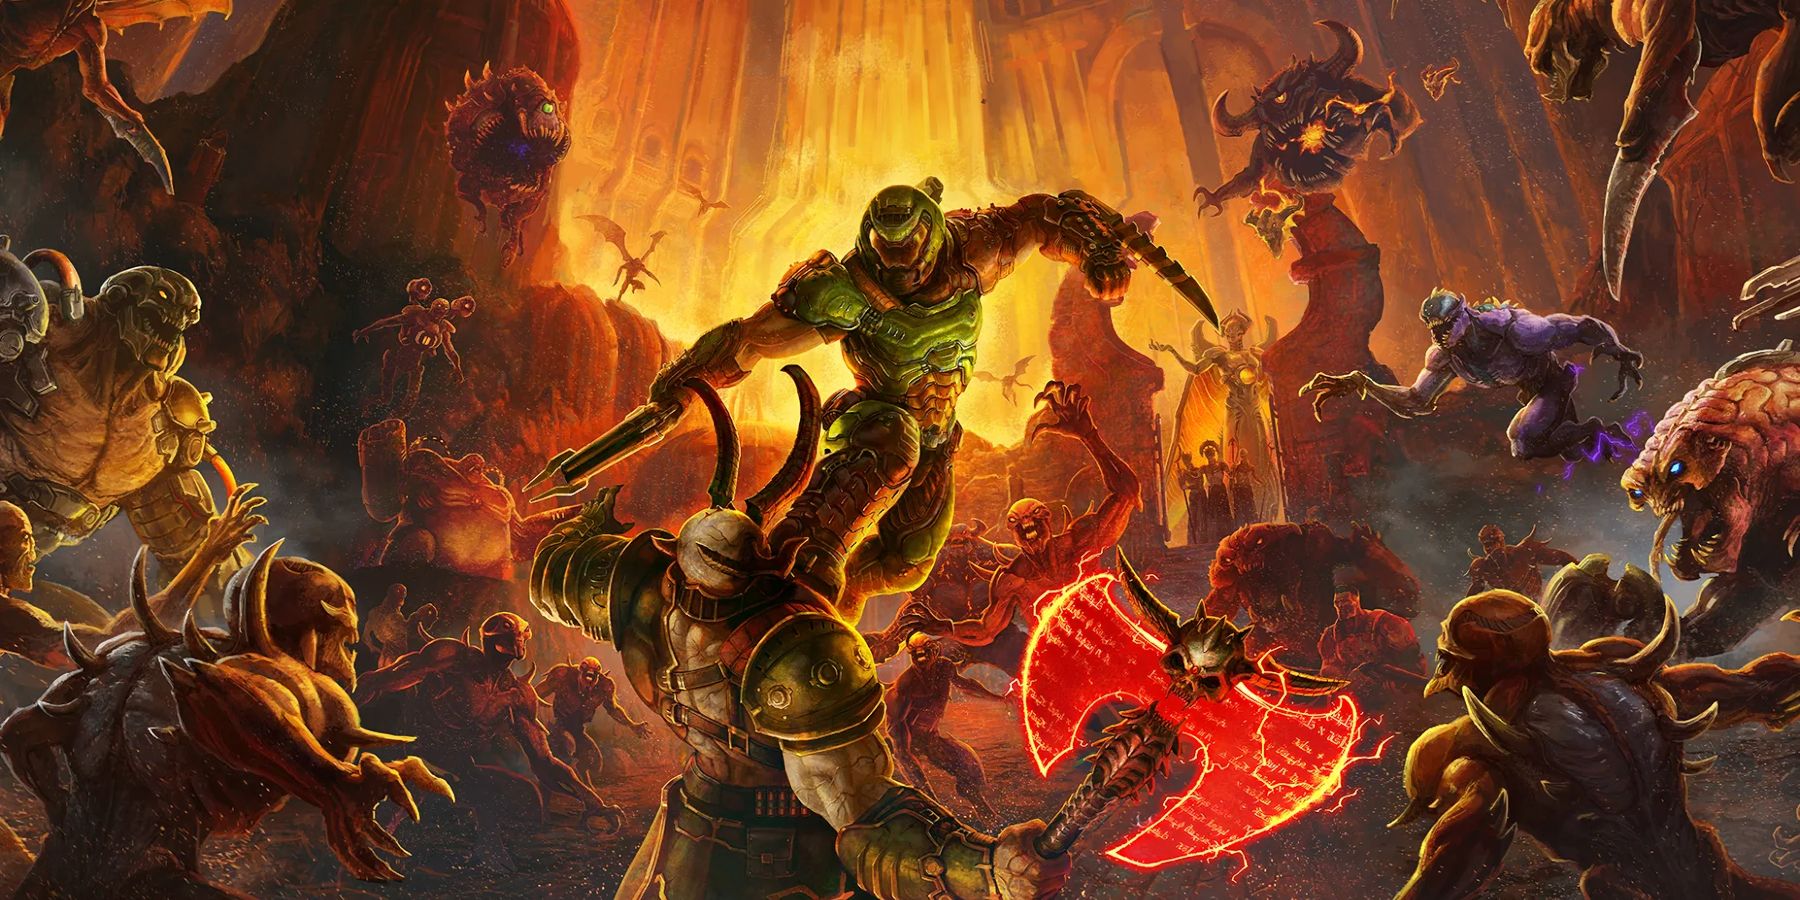 Composer Mick Gordon Issues Statement on Doom Eternal
Soundtrack Controversy